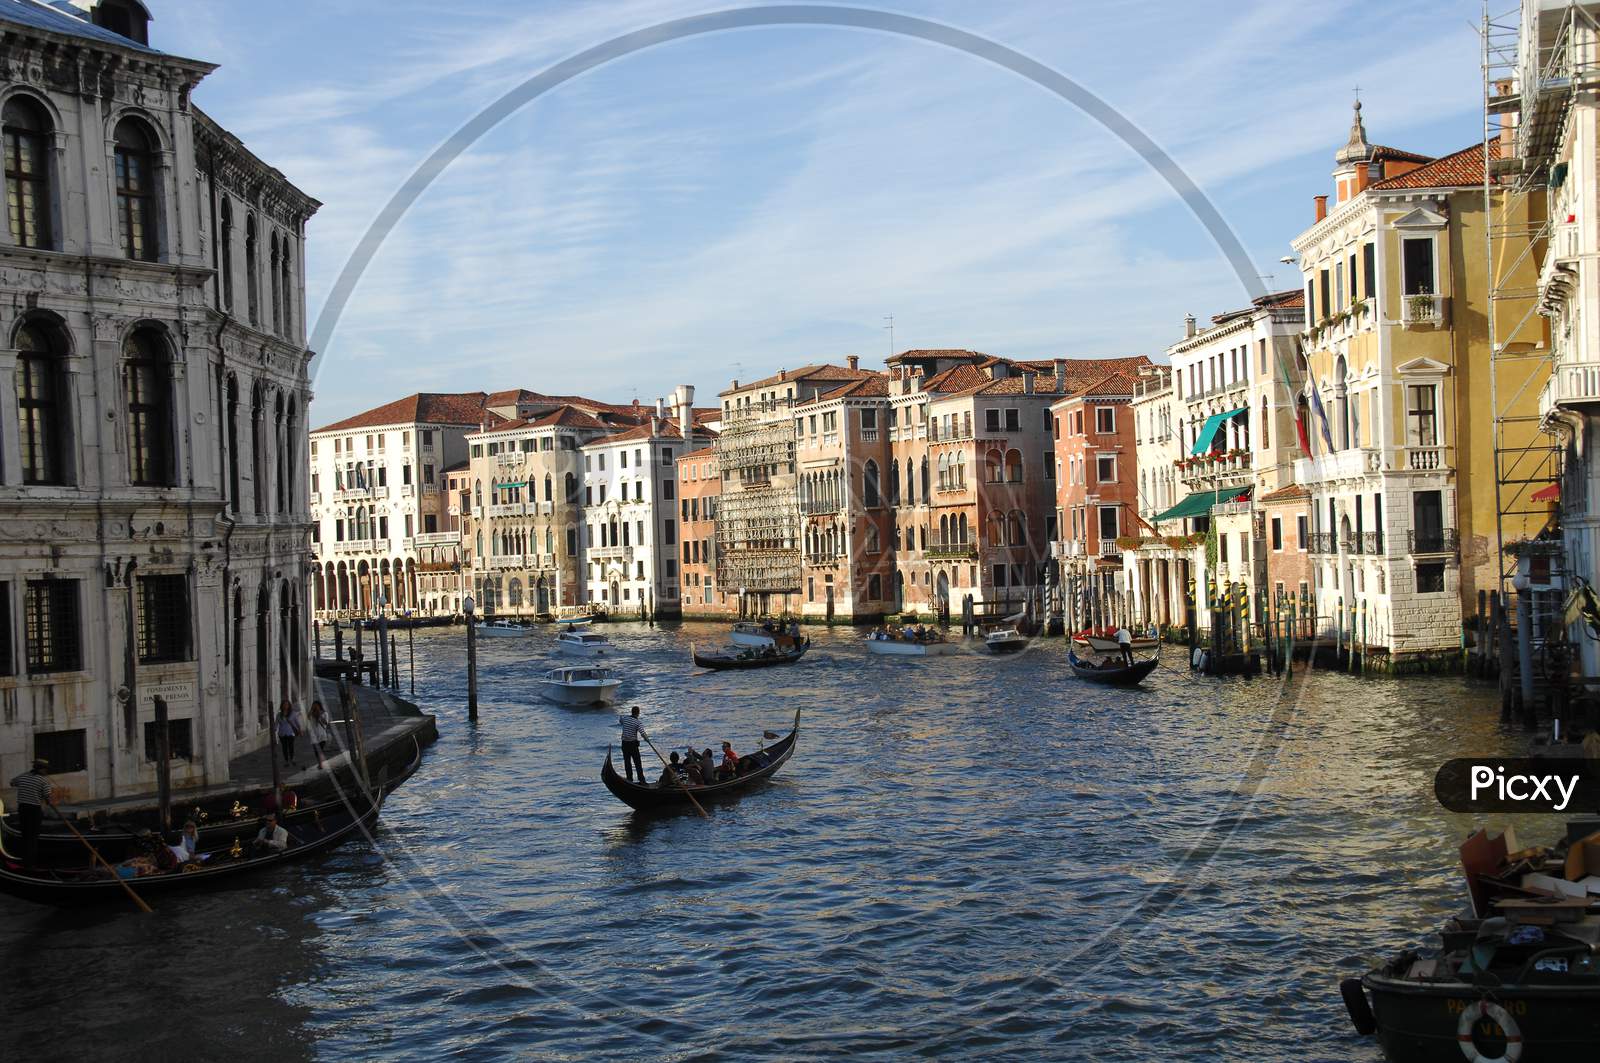 Gondola boats moving on the Grand canal